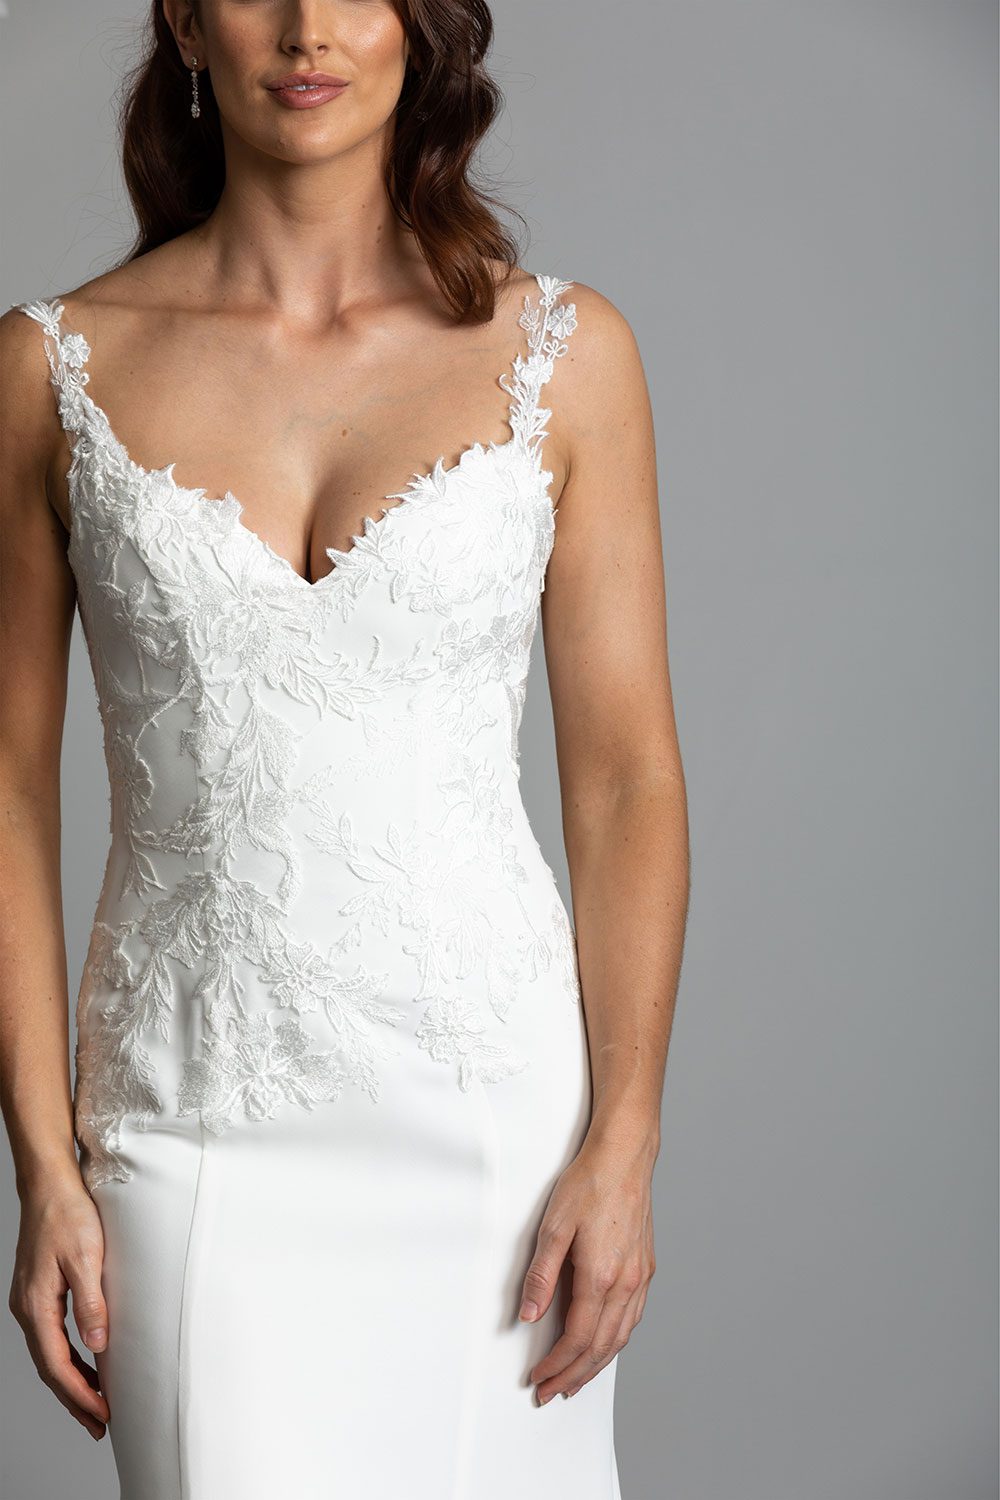 Ana Wedding gown from Vinka Design - This beautiful gown is graced by hand-appliqued delicate floral leaf lace, subtly worked into the front of the bodice and more prominently on the back. A fit-and-flare cut shapes the figure. Close up of front of the gown and intricate lace detail